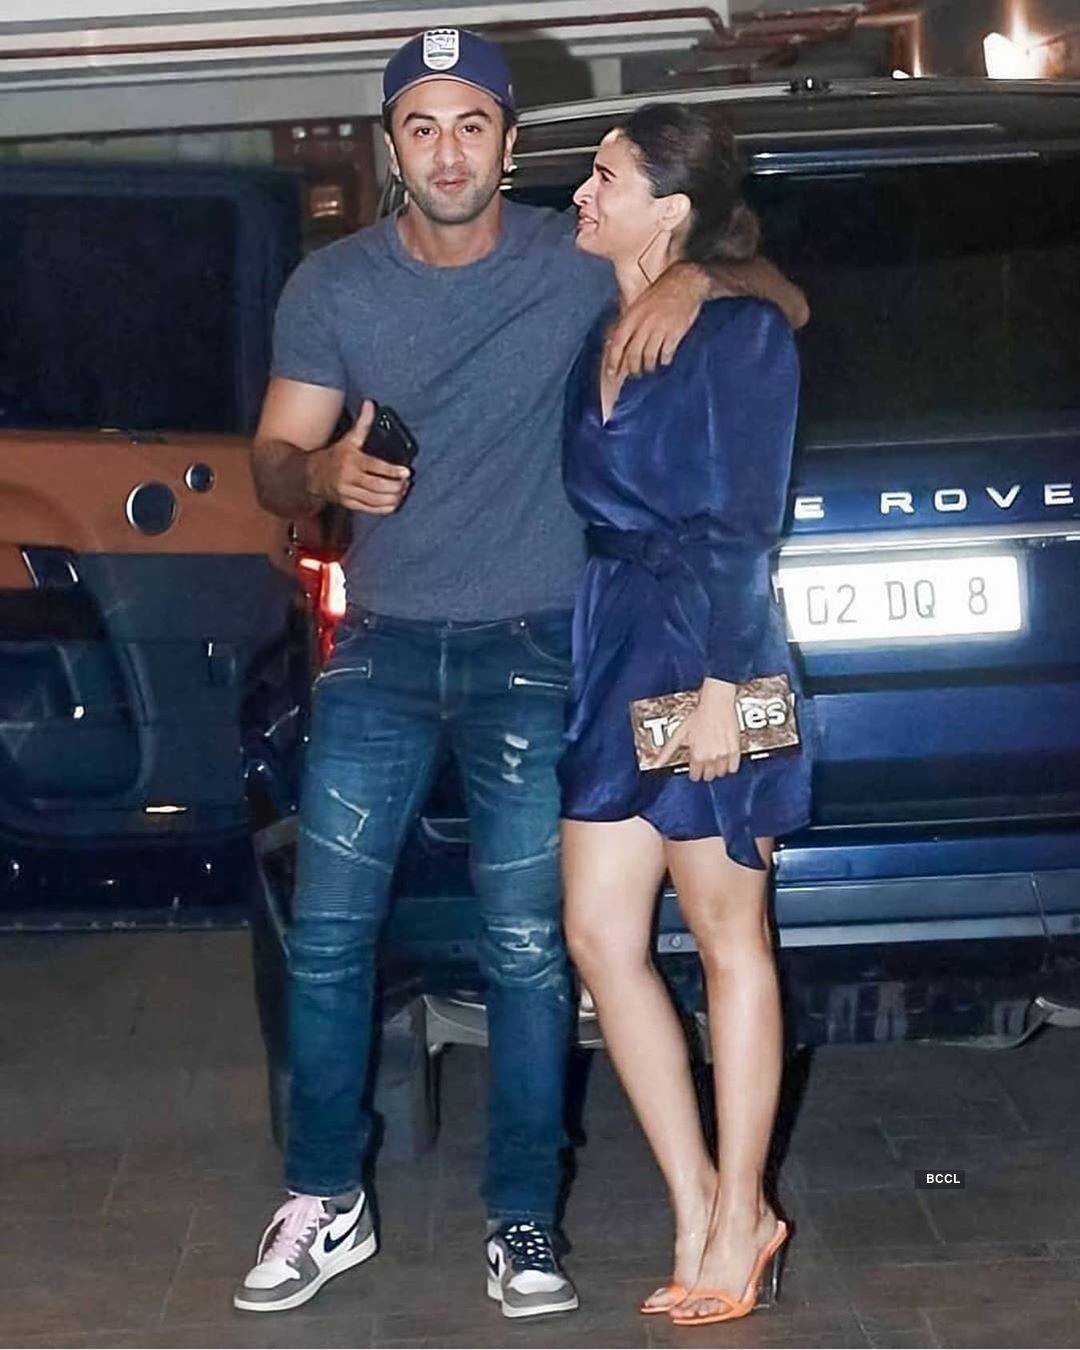 This throwback picture of Alia Bhatt & Ranbir Kapoor from Kareena Kapoor's Christmas party goes viral